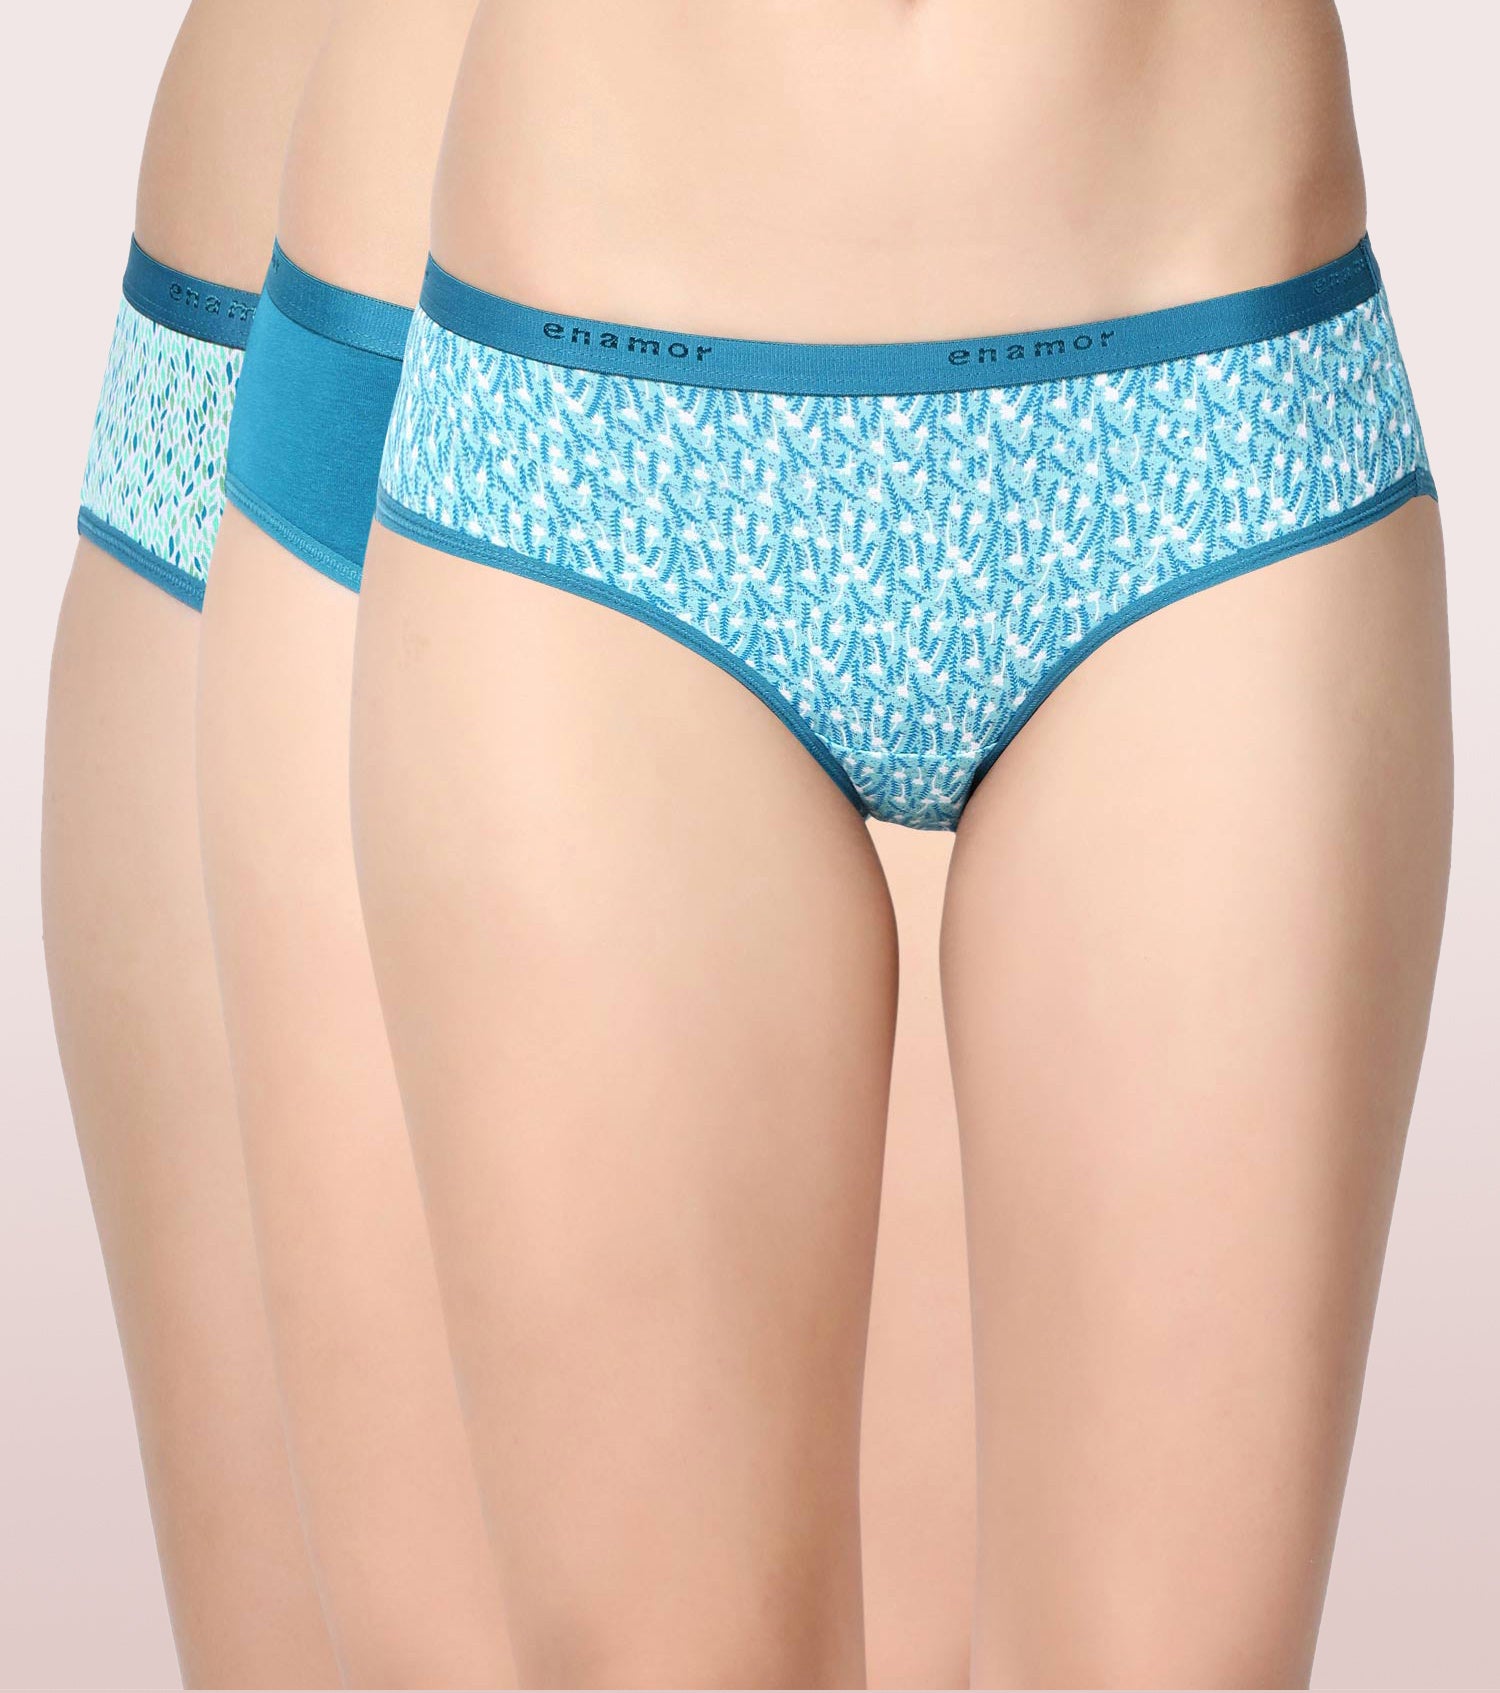 Middle Waist Comfortable Everyday Wear Cotton Panties - Multicolor